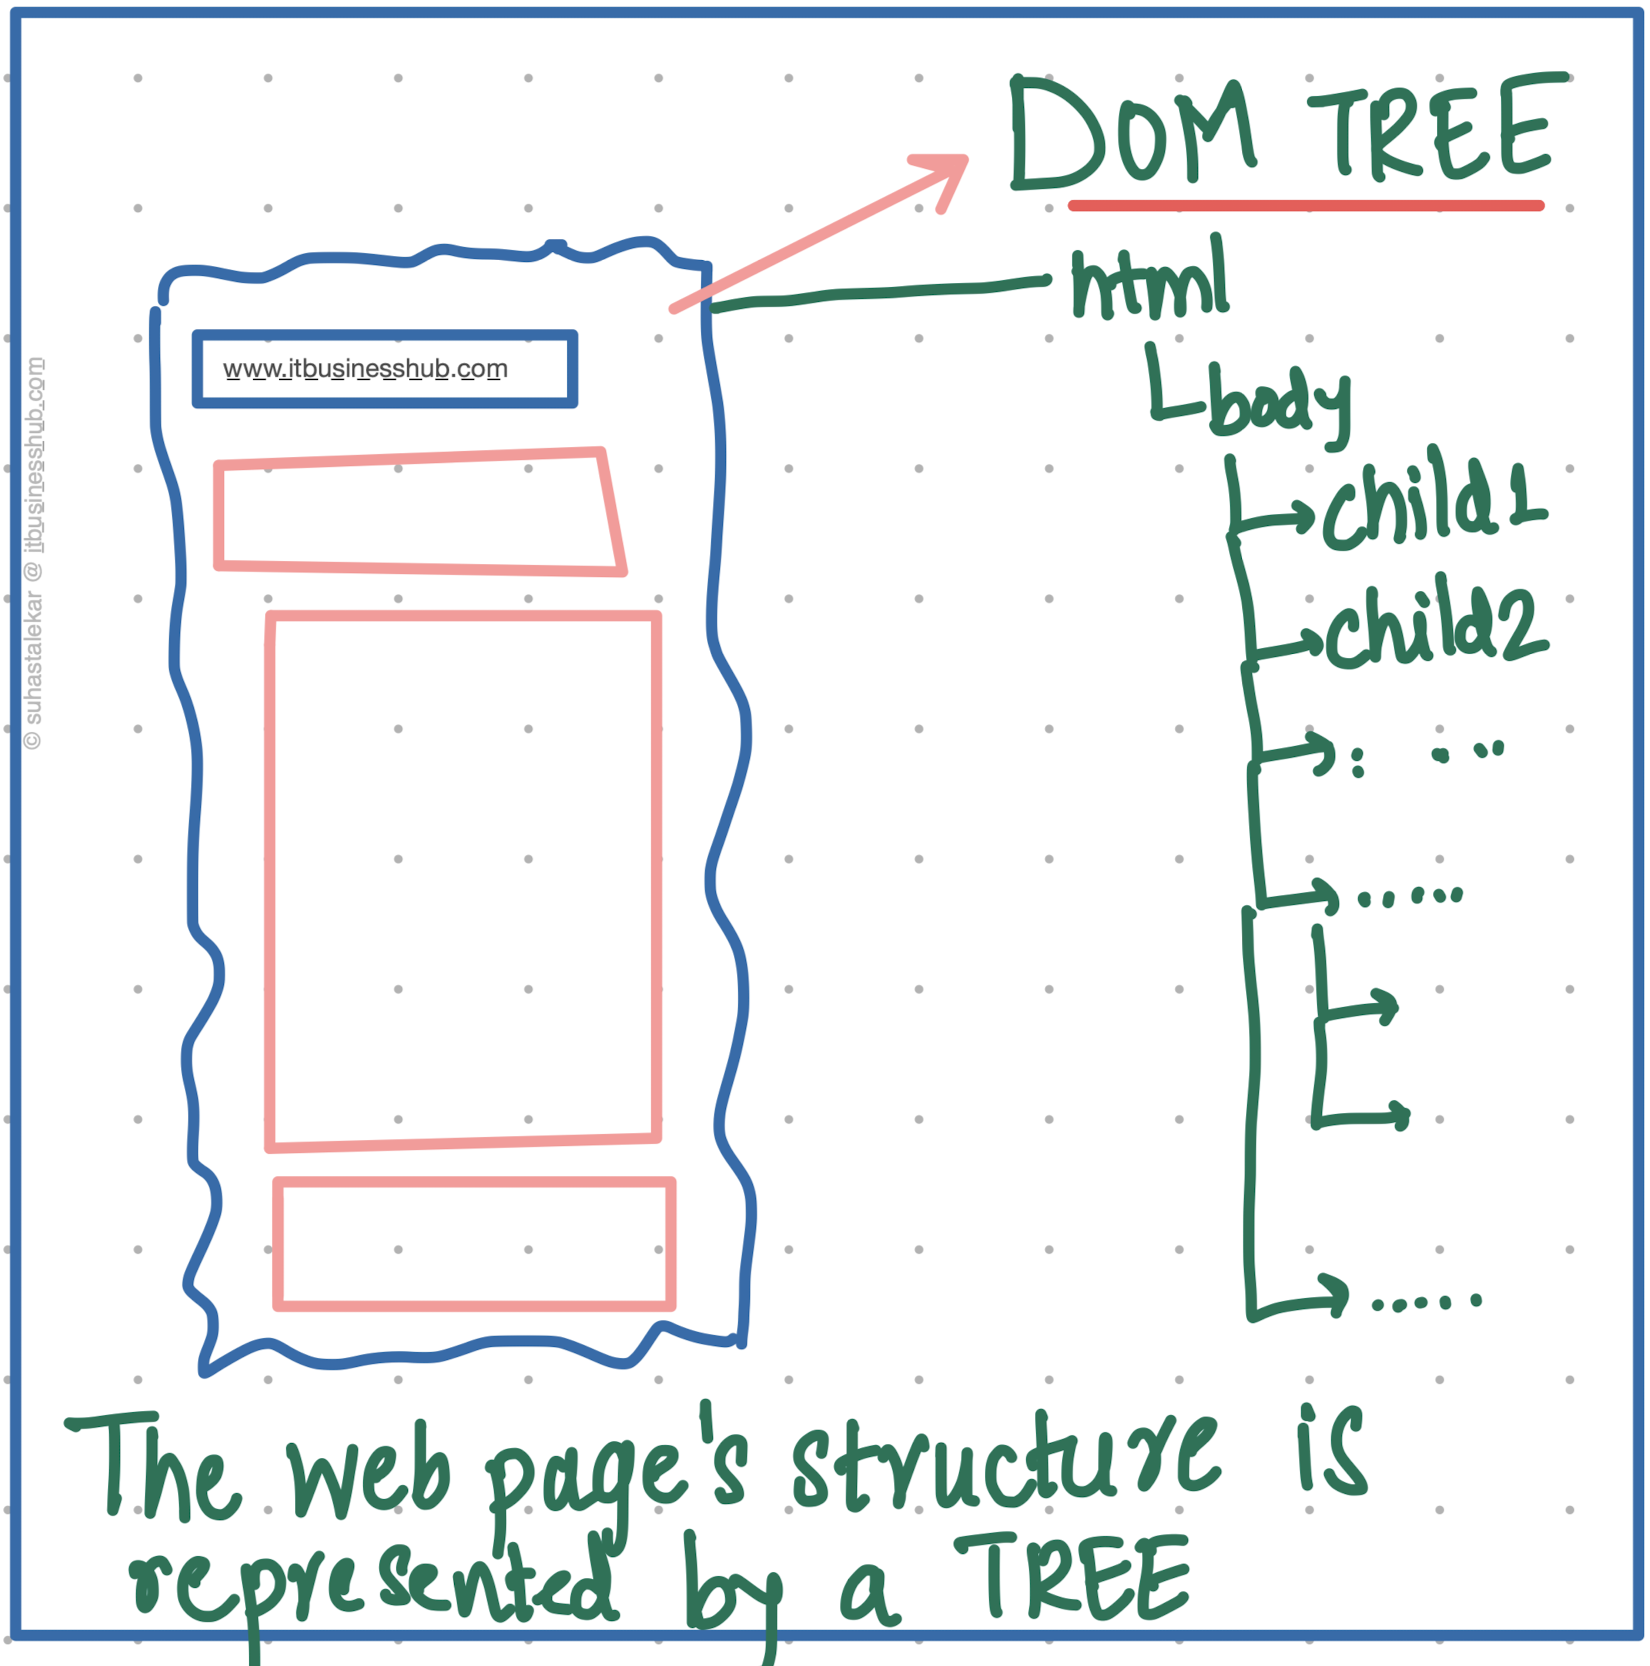 DOM Tree manipulated by front end frameworks 